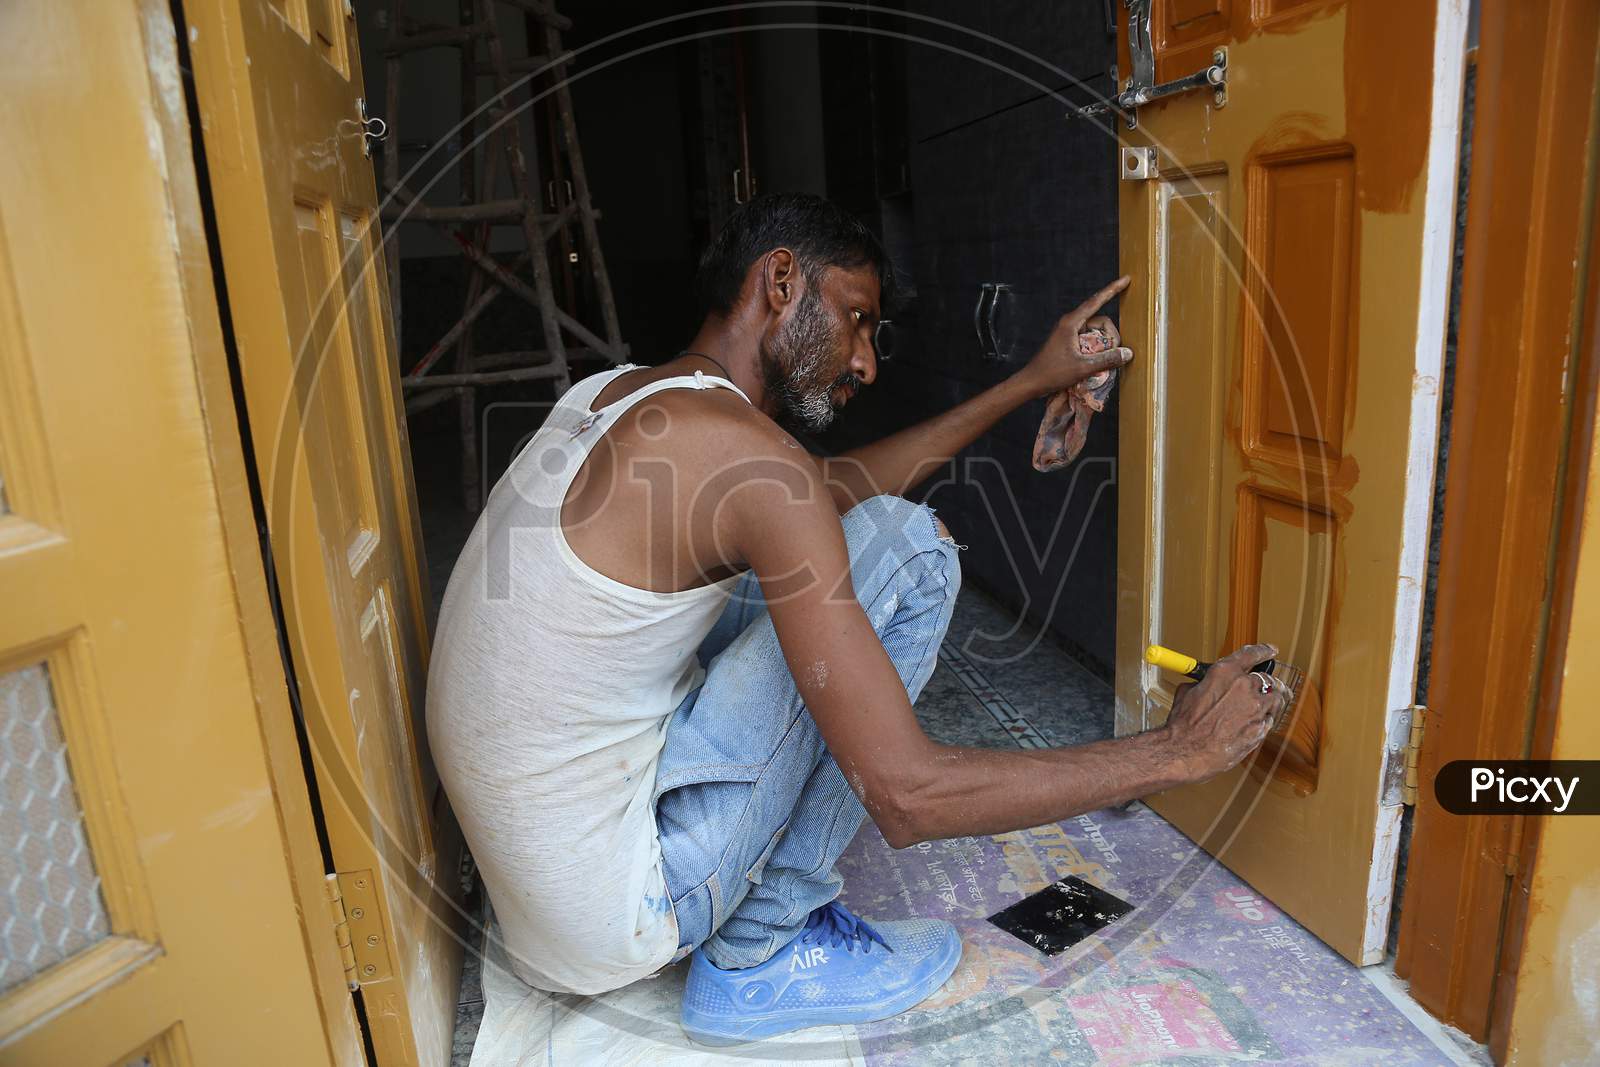 Jodhpur, Rajasthan, India, 20Th September 2020: Indian Male Adult Painting The Entrance Door Wearing Jeans And Vest While Sitting On The Floor Indoor Image, Indian Painters Furnishing Homes In Lock Down